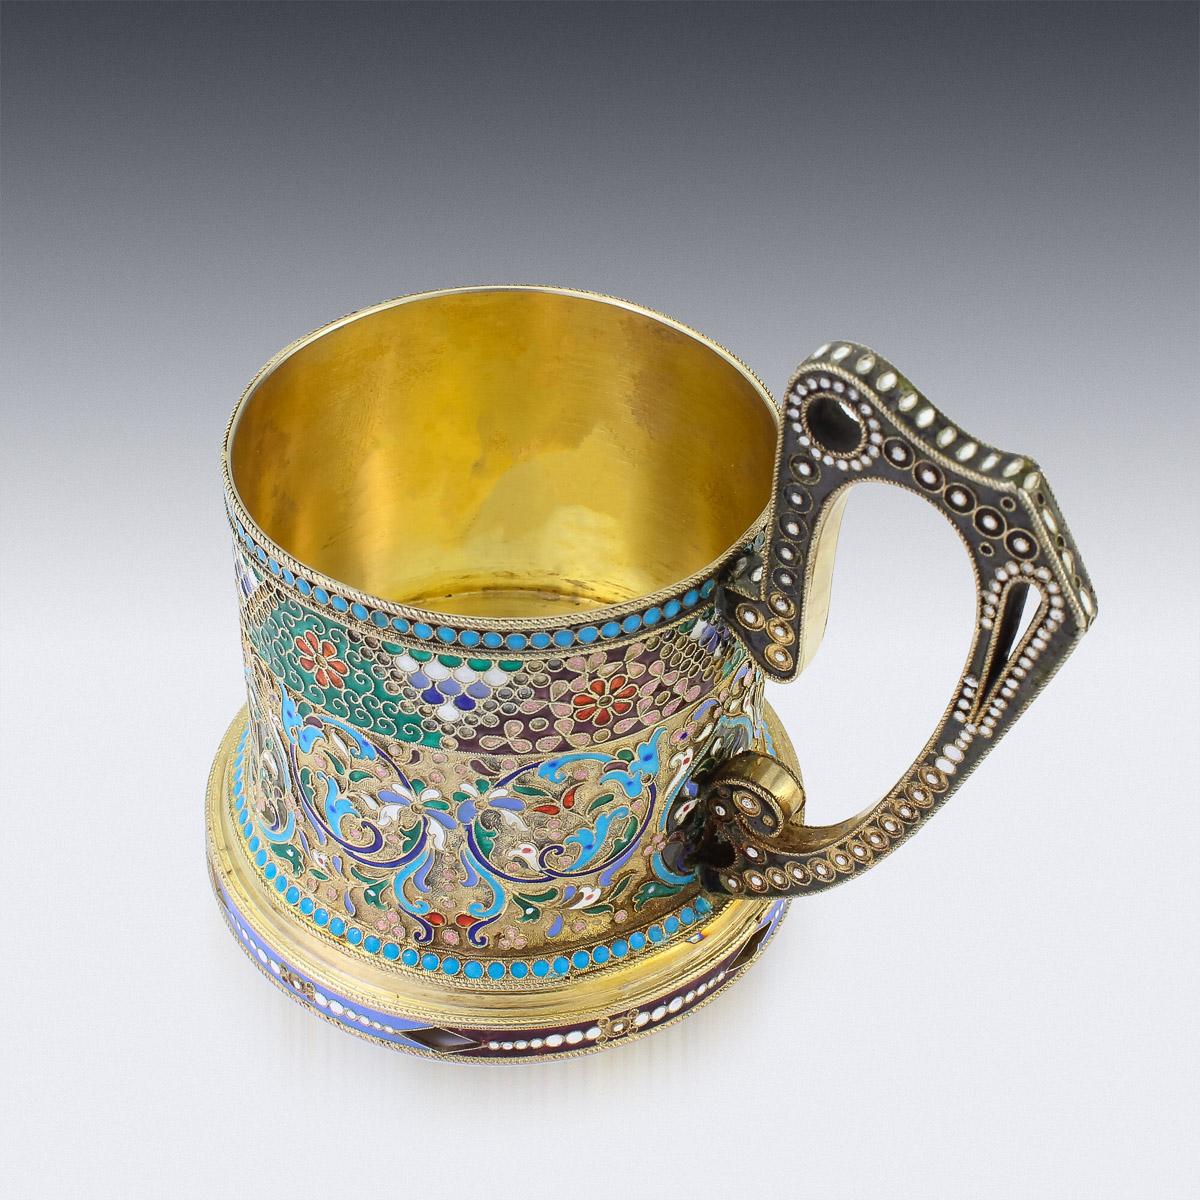 20th Century Imperial Russian Solid Silver-Gilt Enamel Tea Glass Holder, c.1900 3